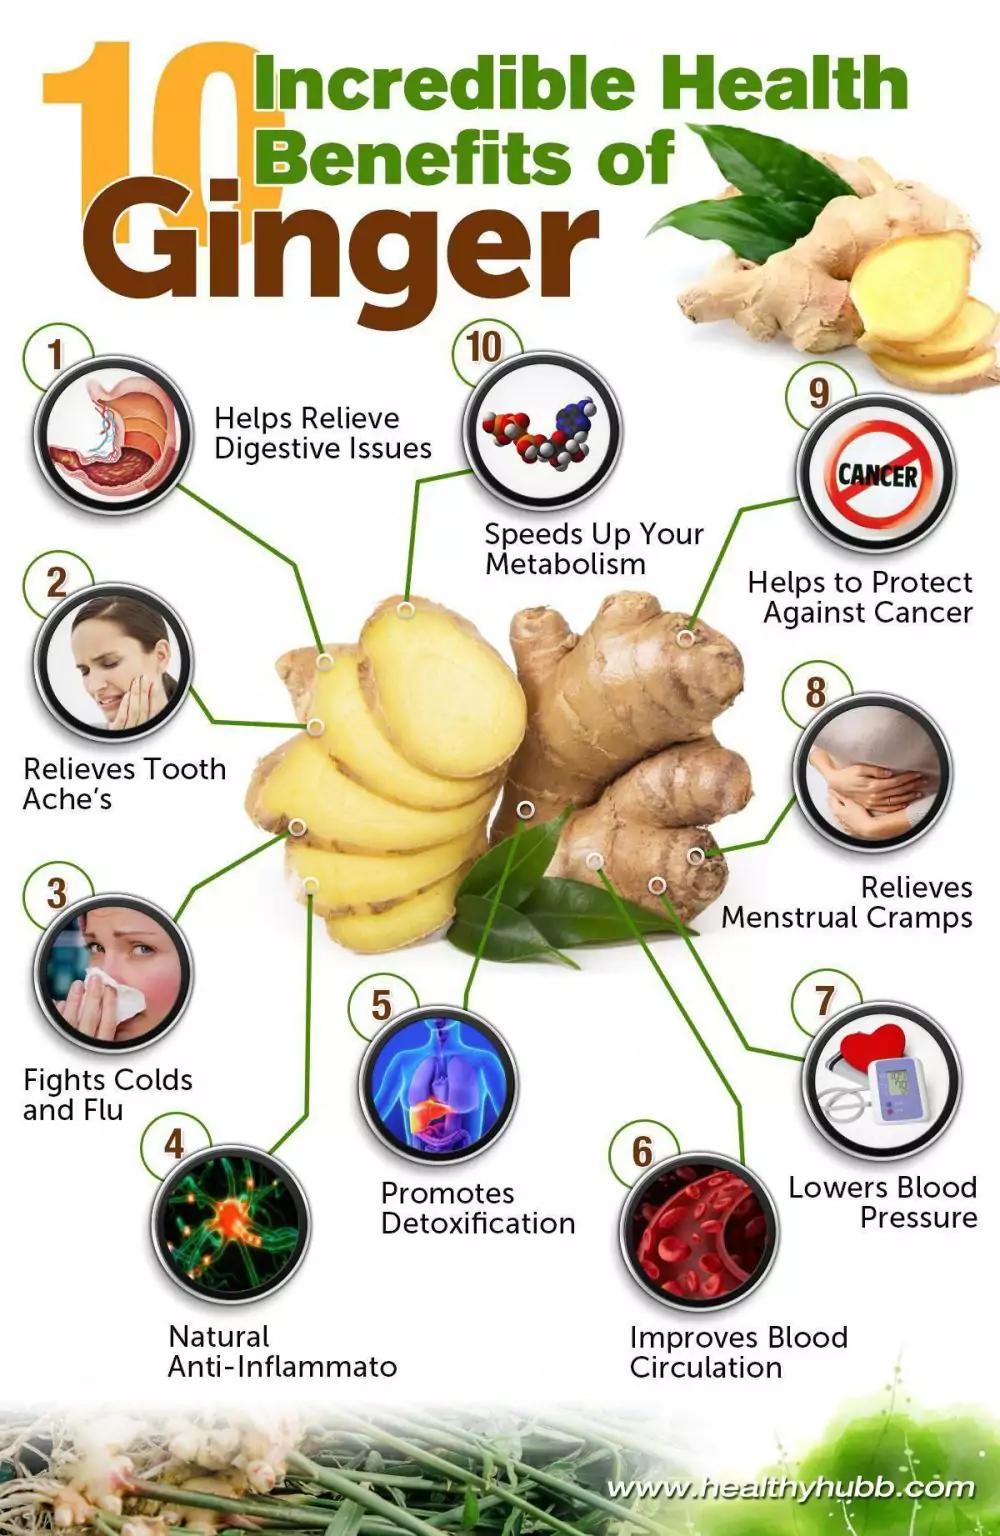 research health benefits of ginger